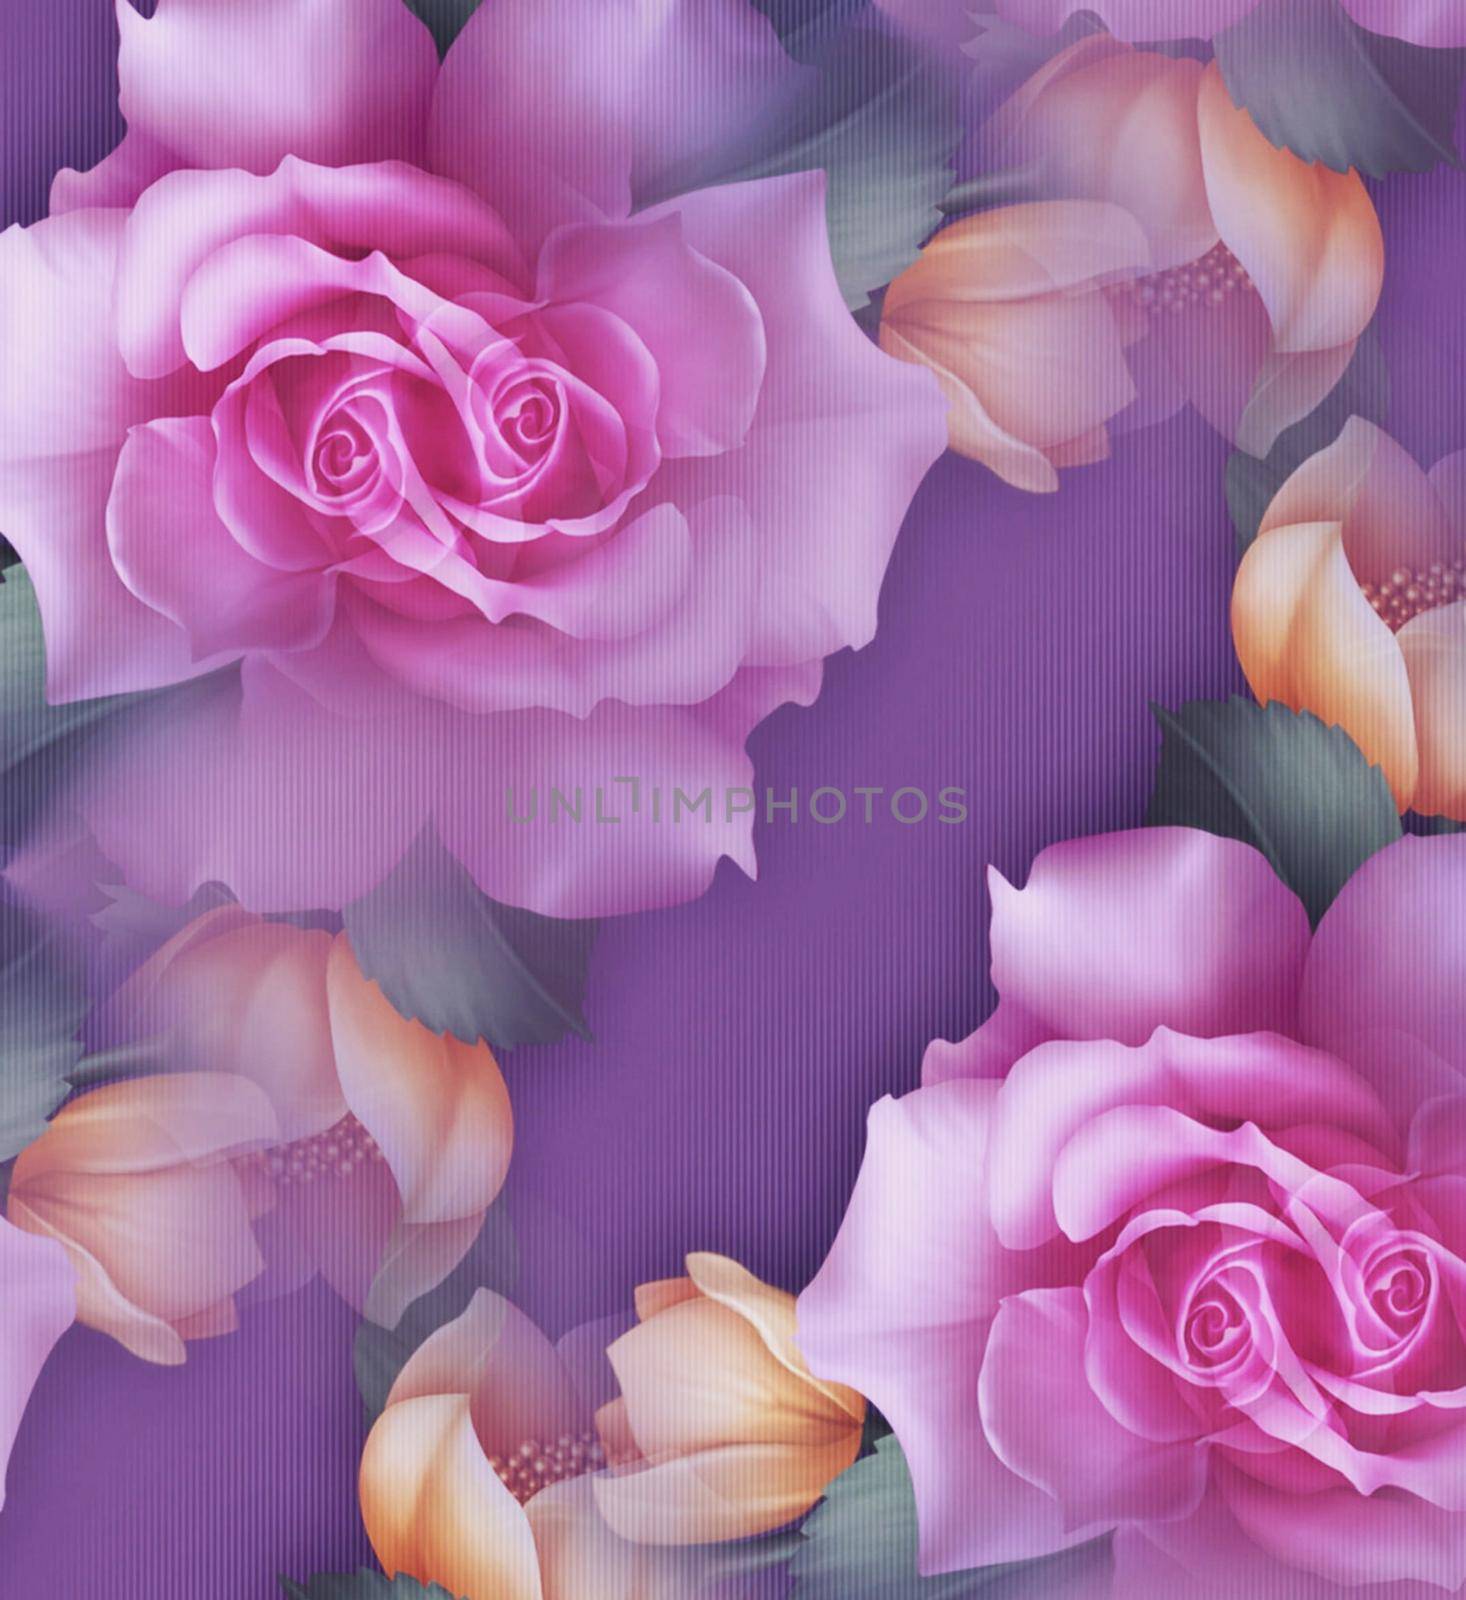 A flowers backgrounds for wrappers, wallpapers, postcards by TravelSync27